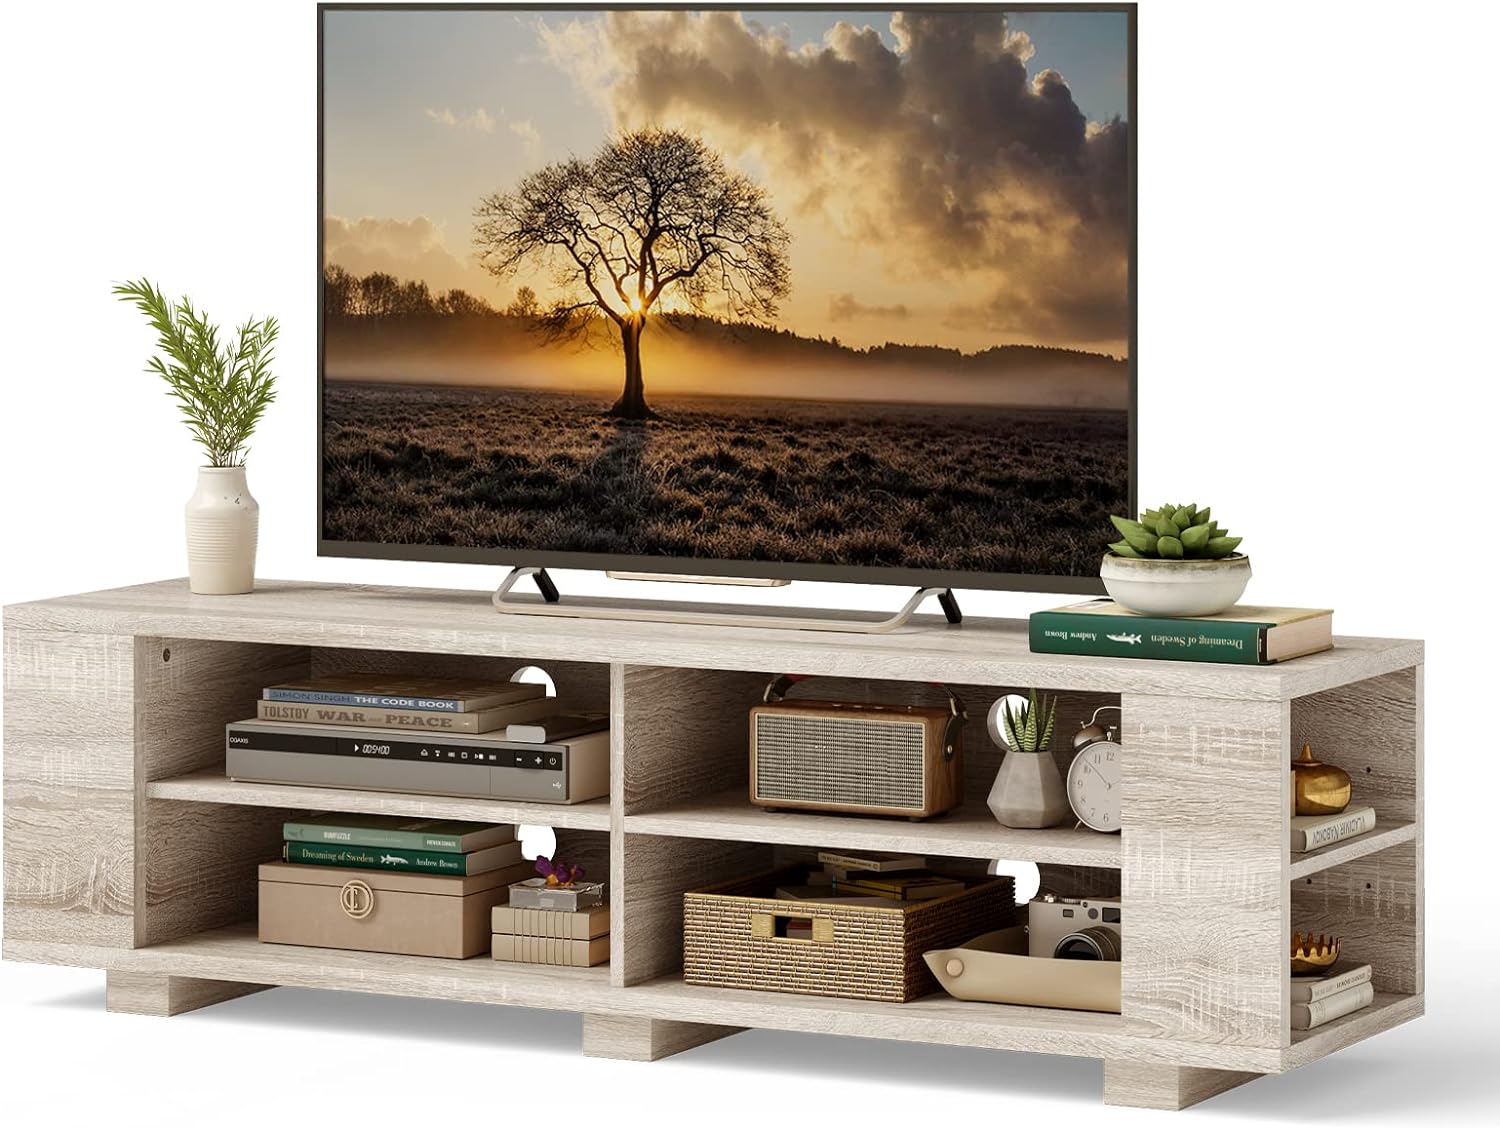 Tangkula Wooden TV Stand for TVs up to 65 Inch Flat Screen, Modern Entertainment Center with 8 Open Shelves, Farmhouse TV Storage Cabinet for Living Room Bedroom, TV Console Table (White Oak)